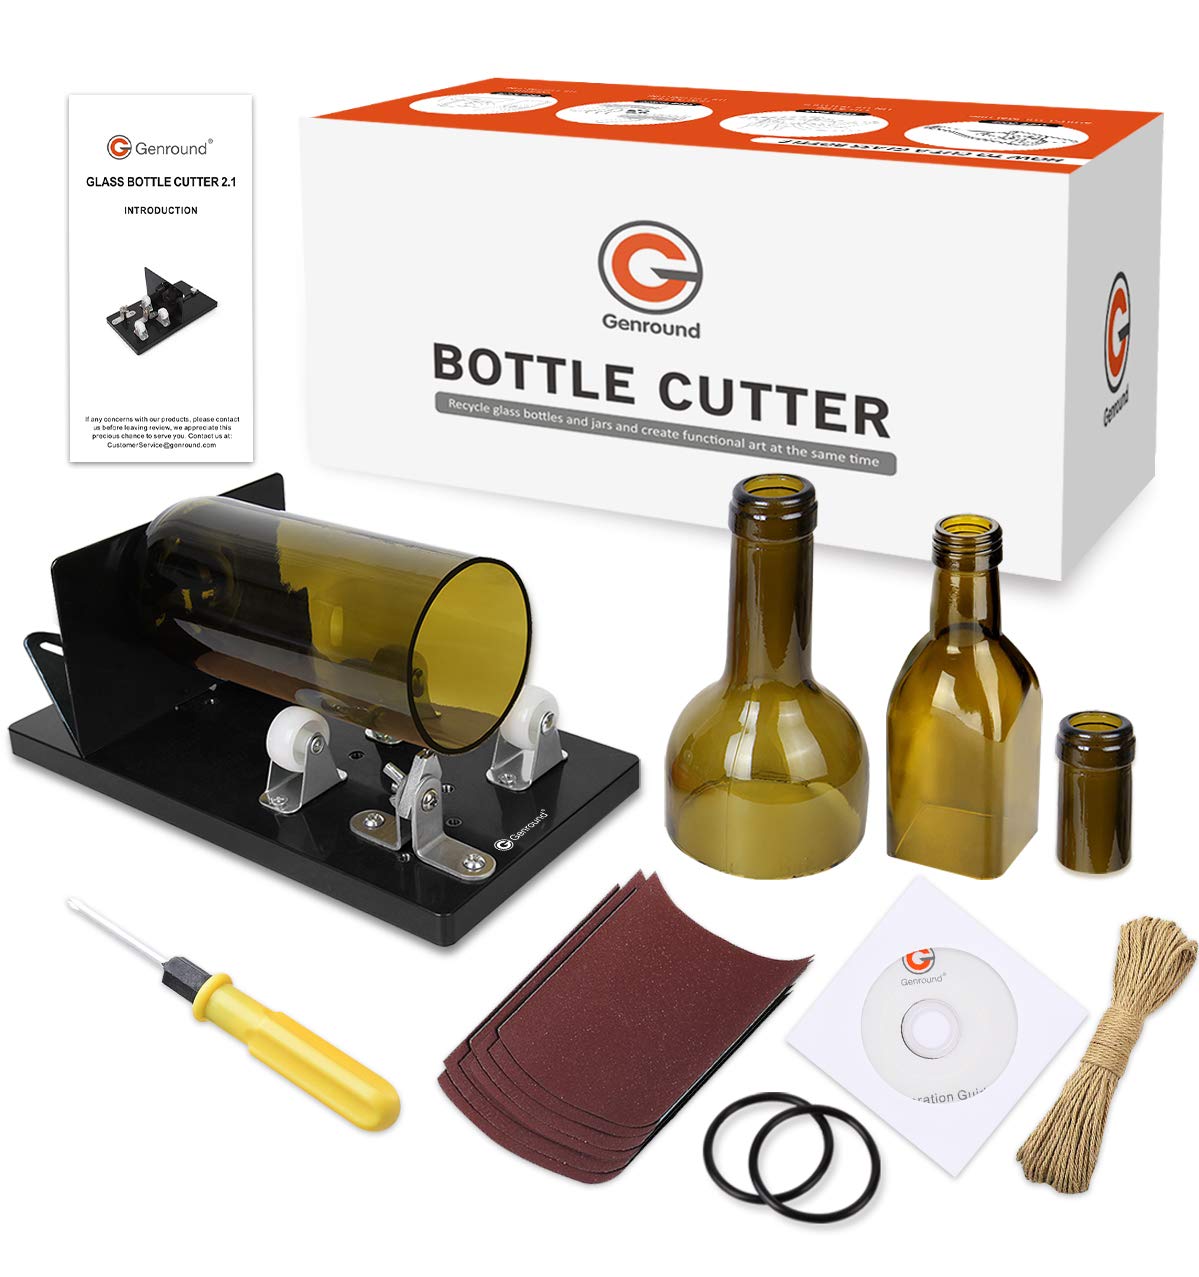 Glass Bottle Cutter, Glass Cutter For Bottles, Diy Machine For Cutting  Beer, Liquor, Whiskey, Alcohol, Champagne